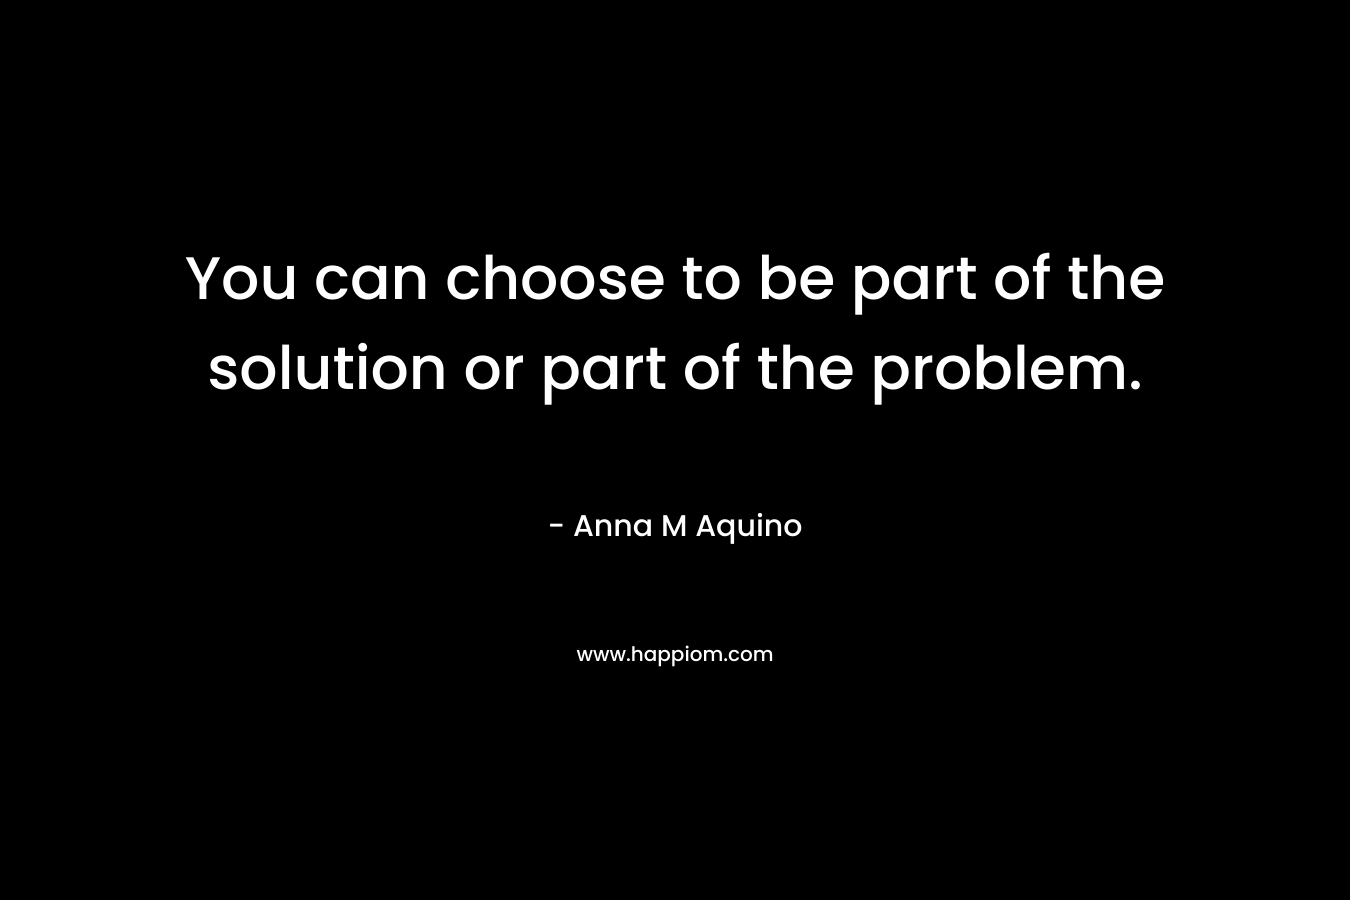 You can choose to be part of the solution or part of the problem.